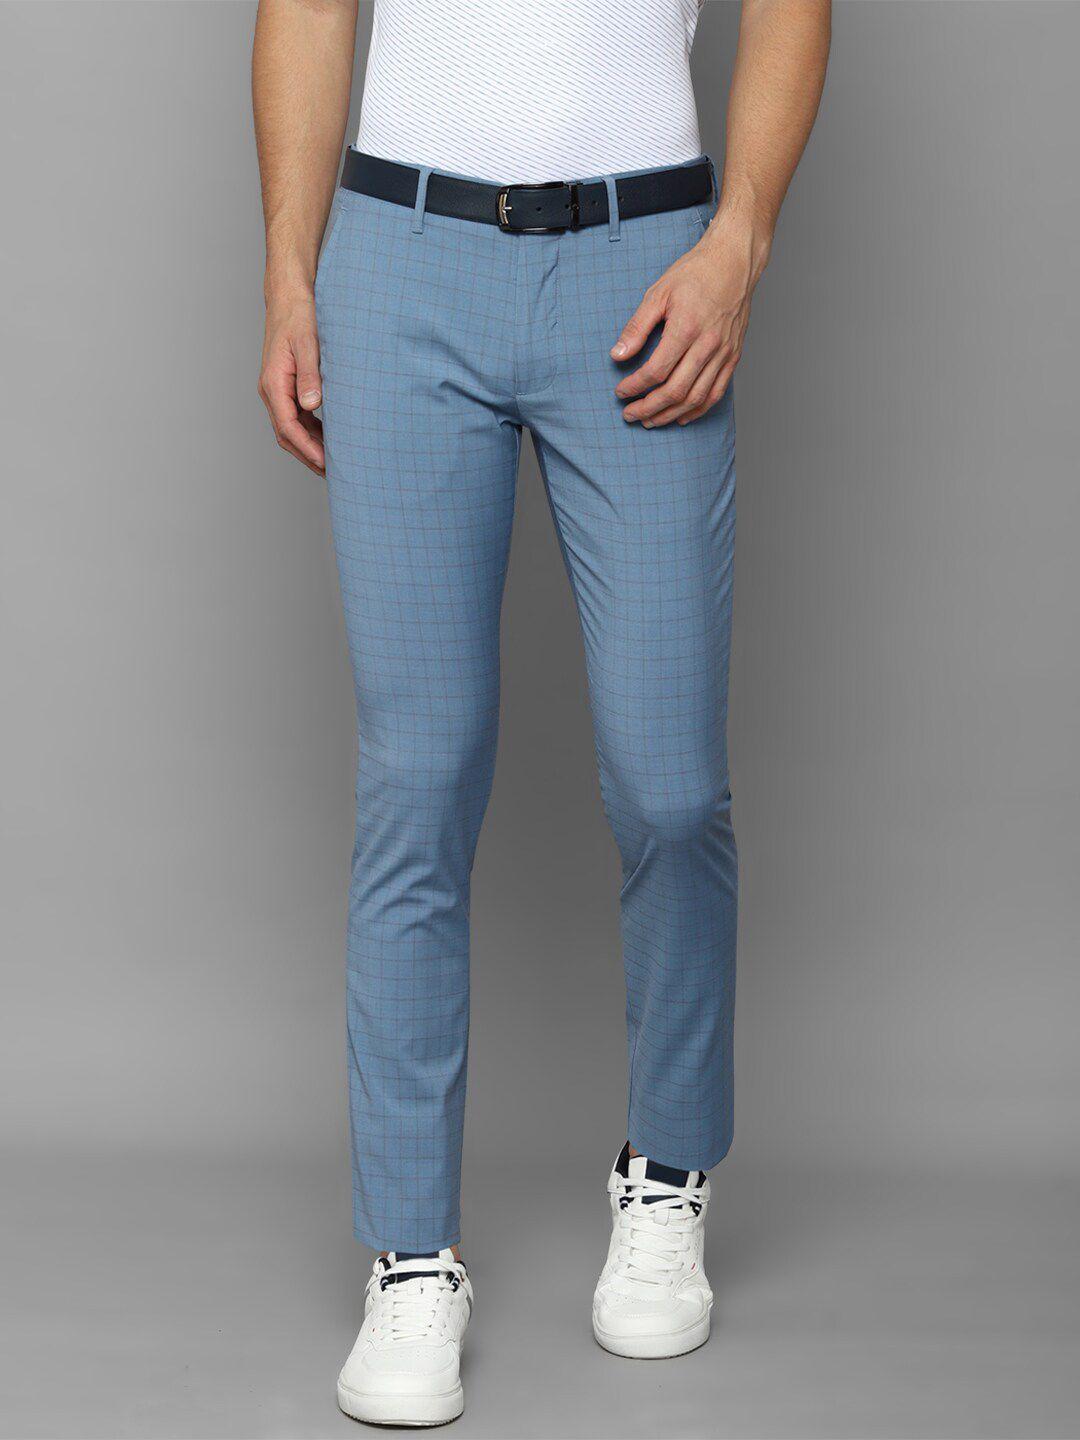 louis philippe sport men blue checked slim fit trousers